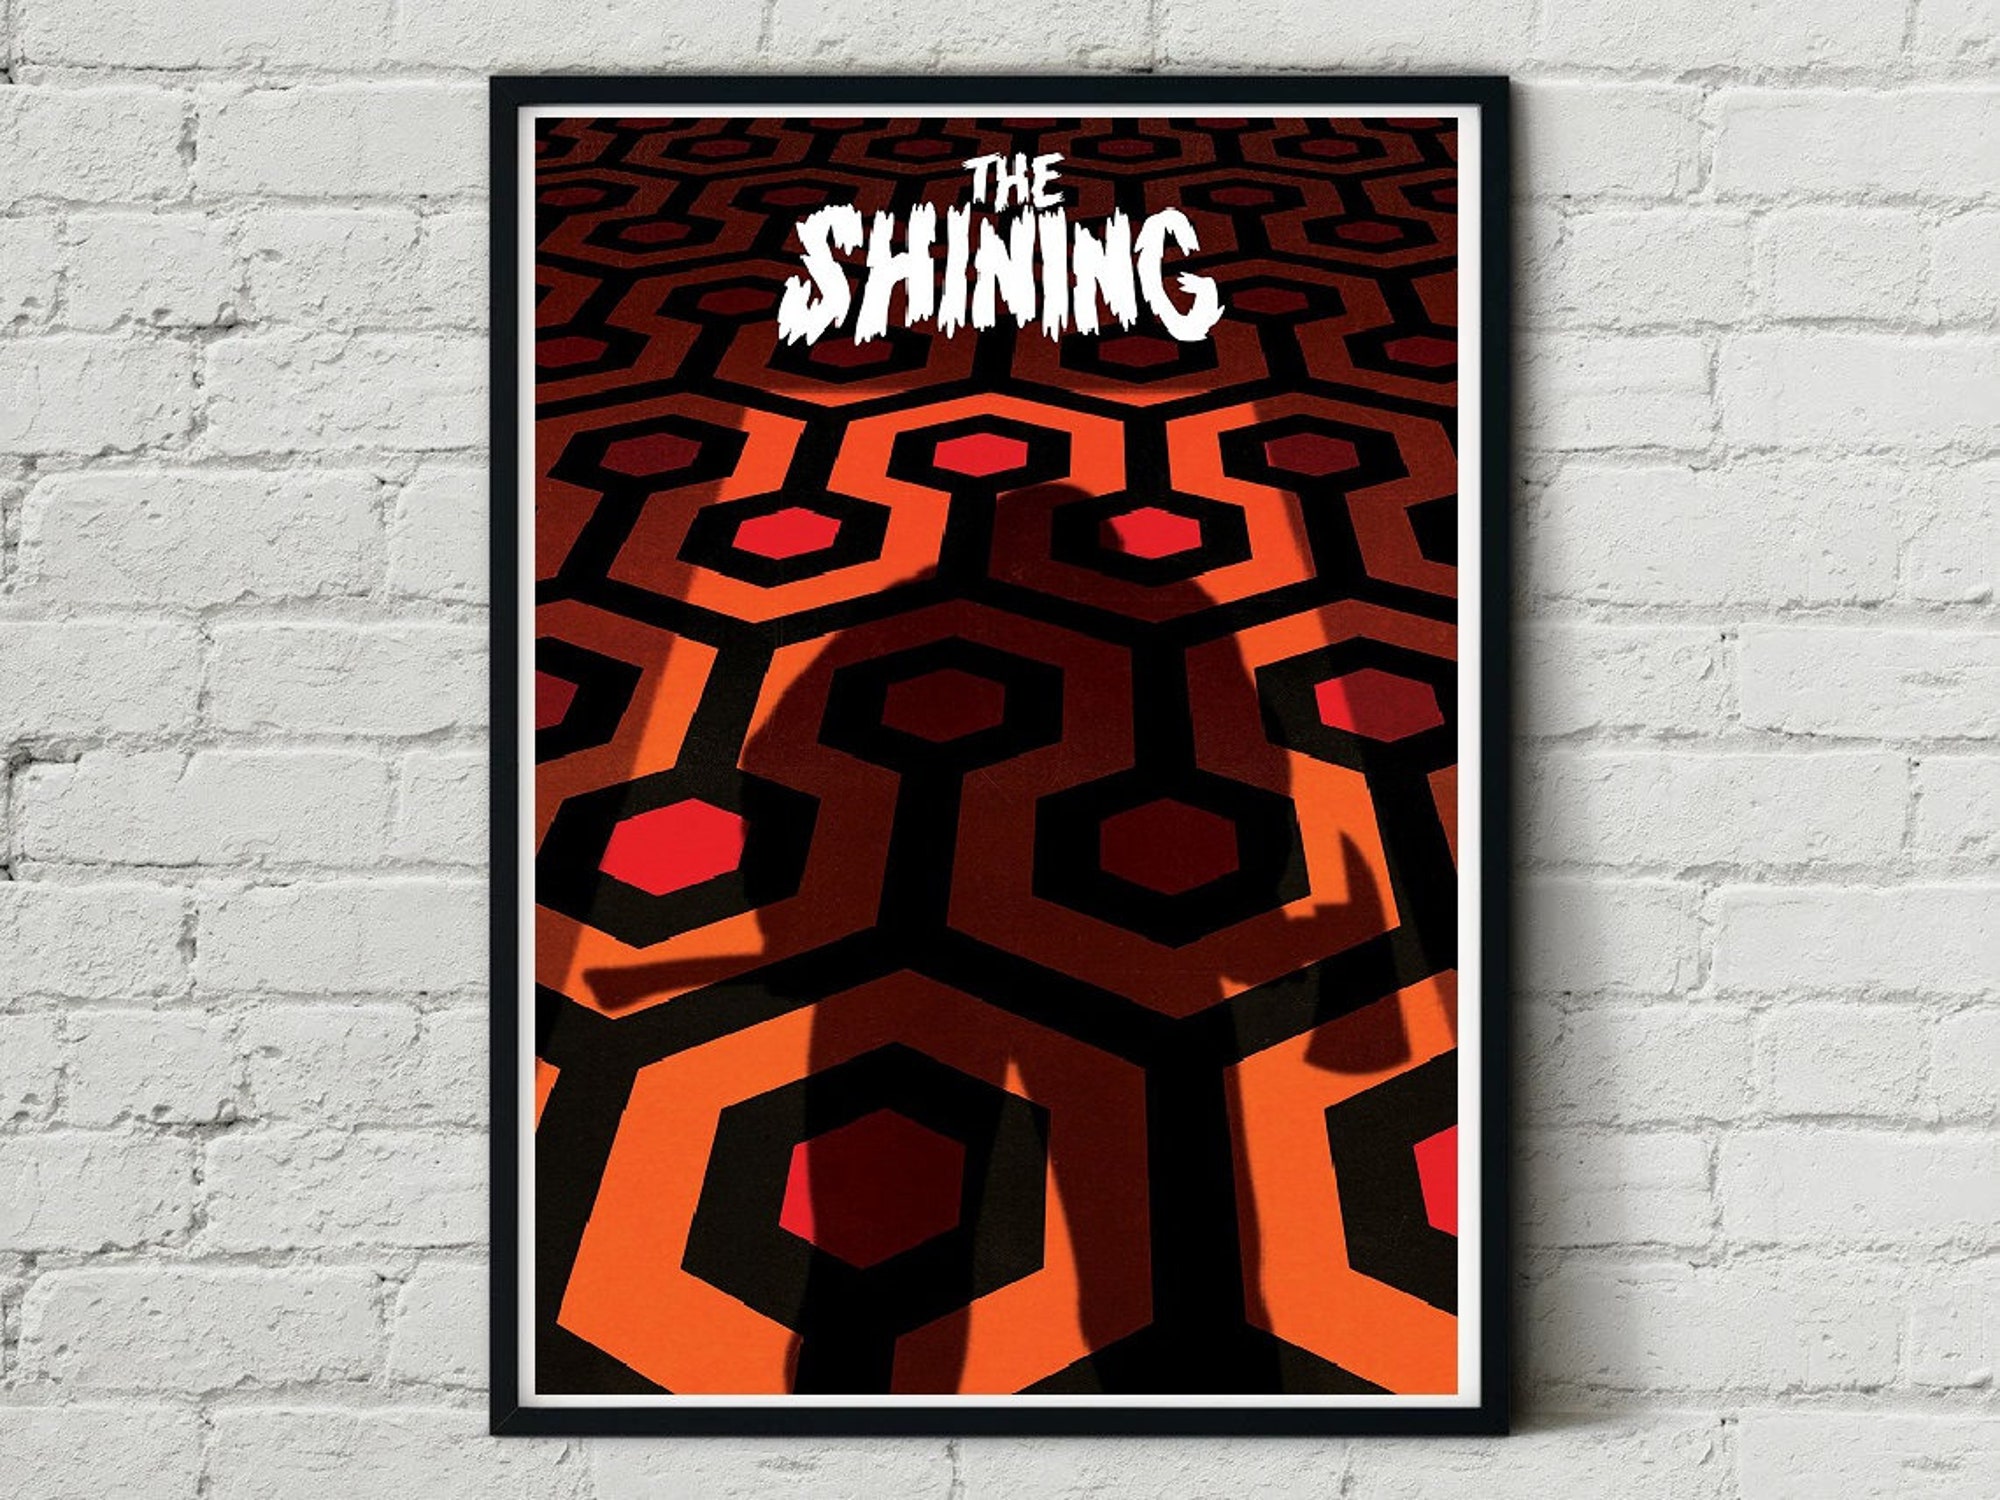 Discover The Shining Stanley Kubrick Horror Design Movie Film Poster Print Wall Decor Decoration